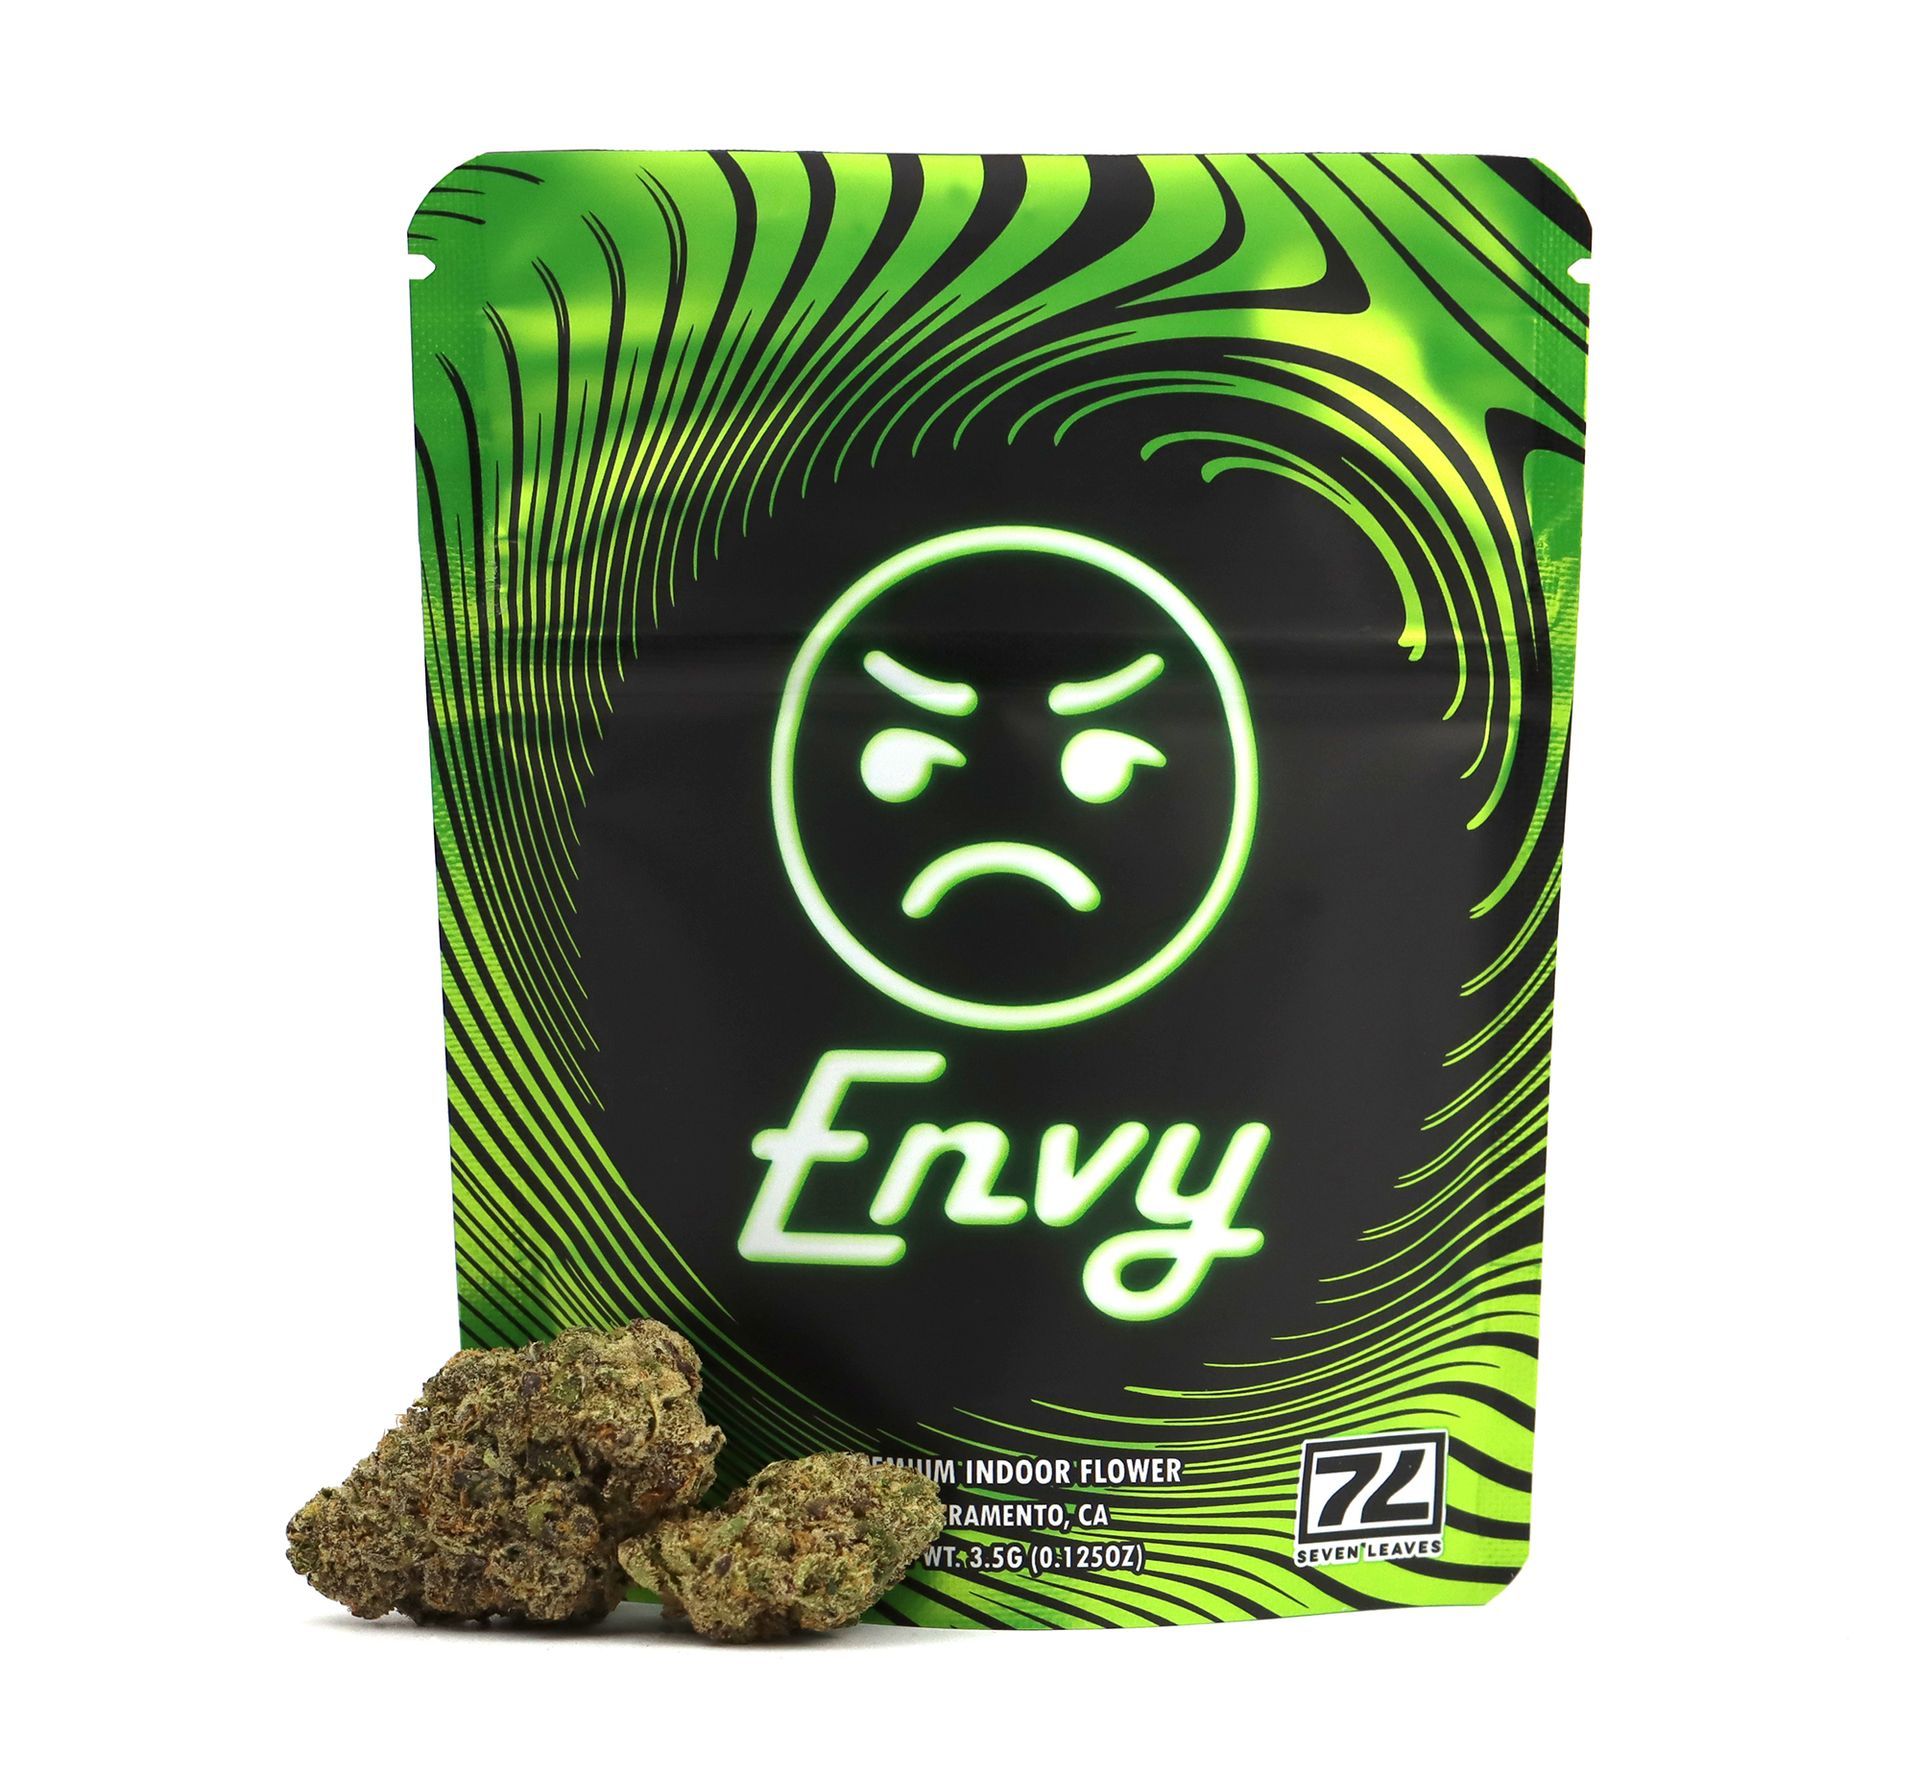 packaging spread of envy with weed next to it